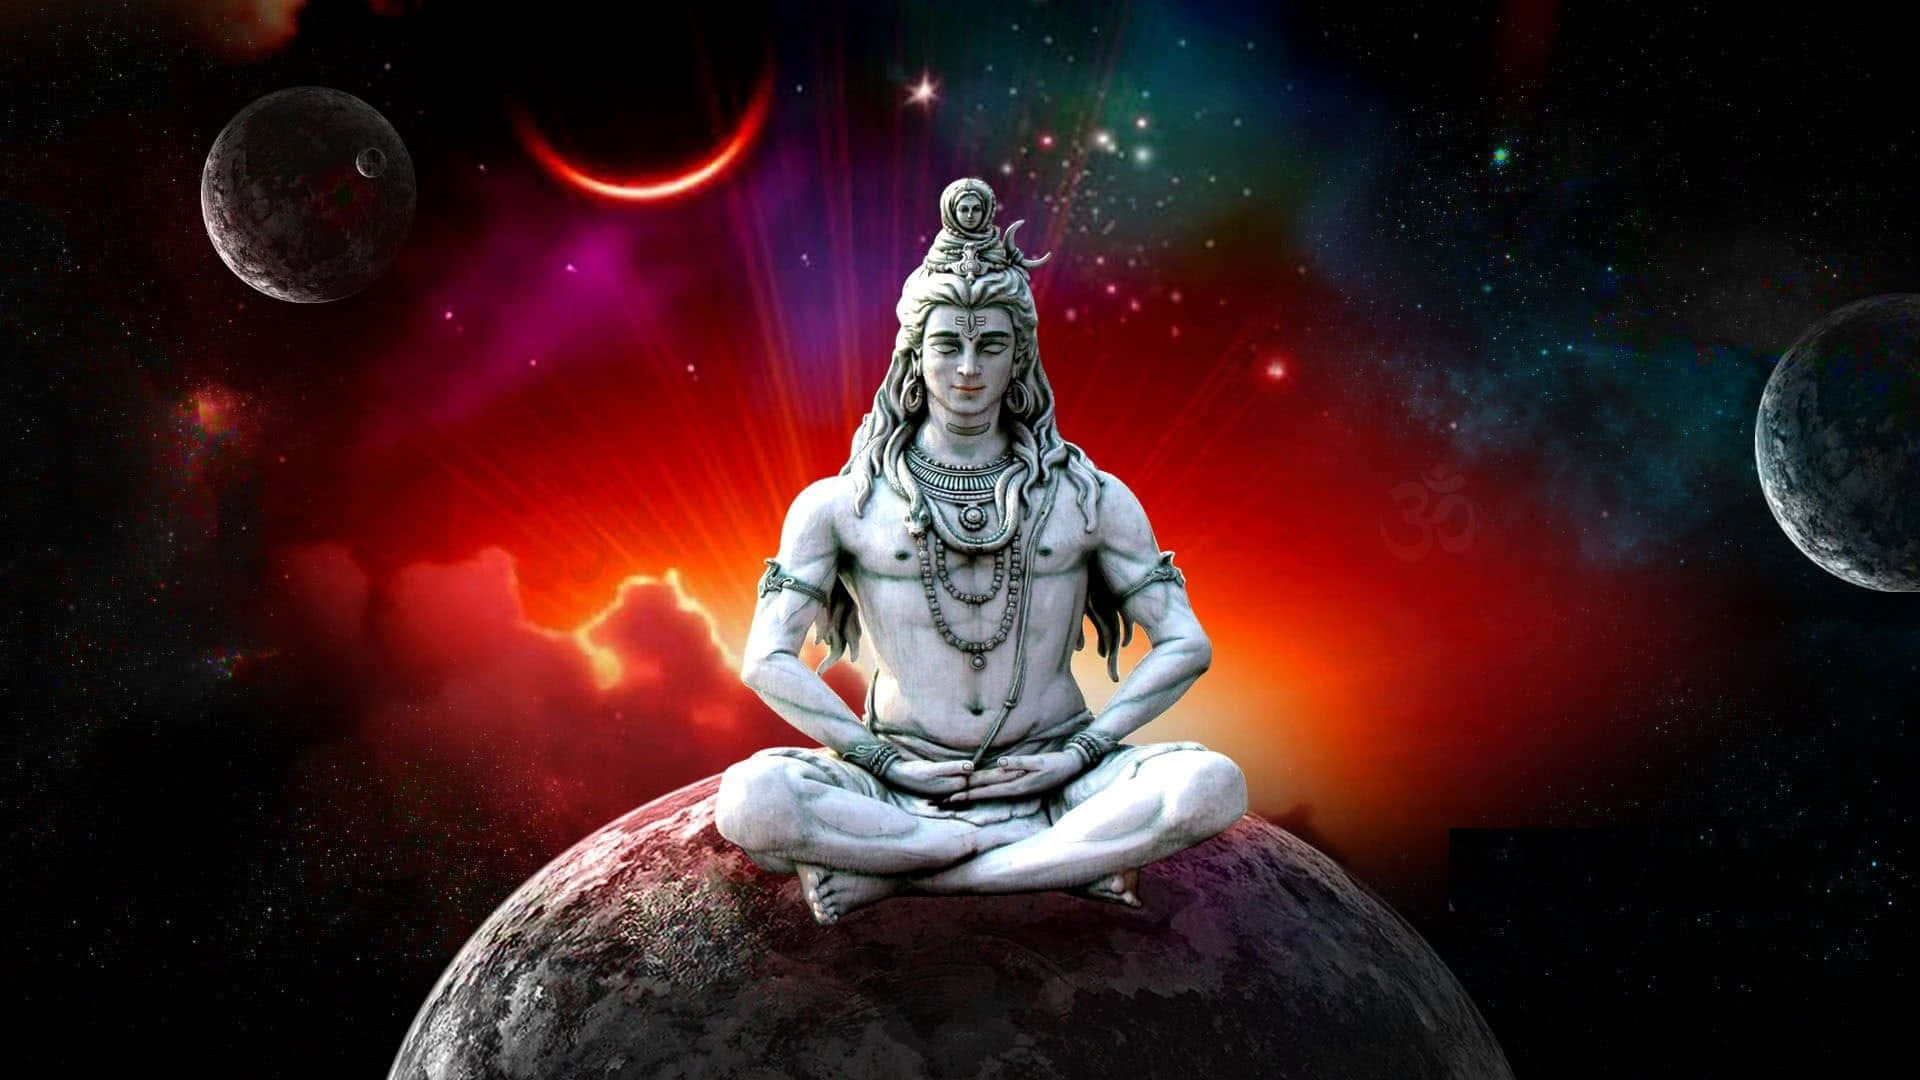 A Lord Shiva Sitting On A Planet